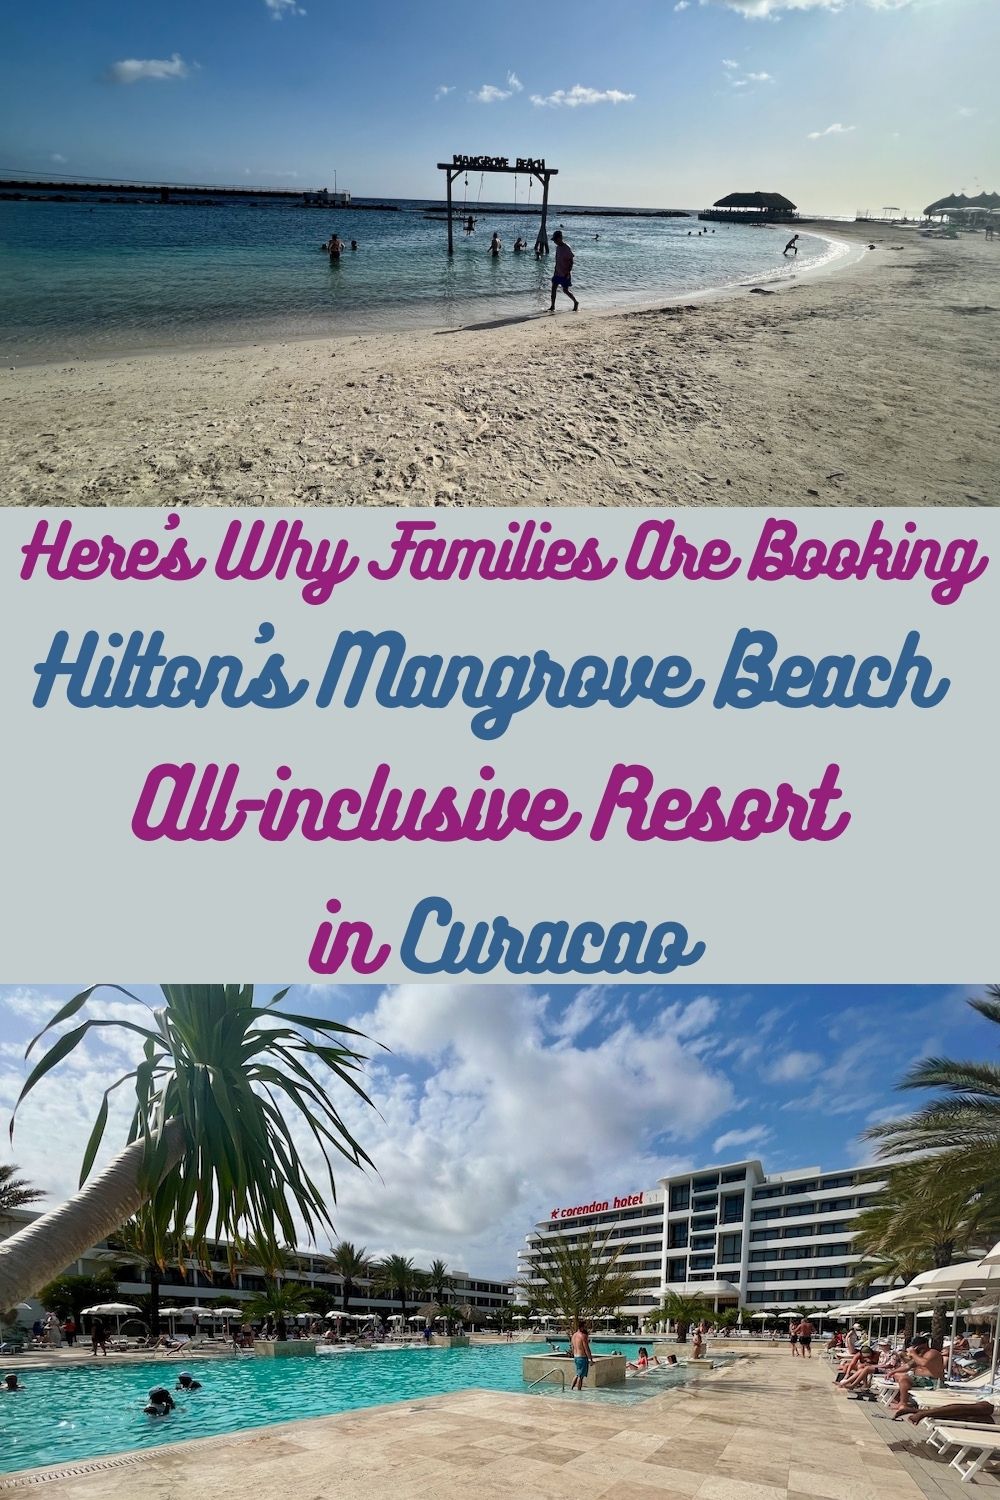 mangrove beach corendon is hilton's all-inclusive resort in curacao. here's what my family thought of the beach, restaurants, food, pool, room & more: review 